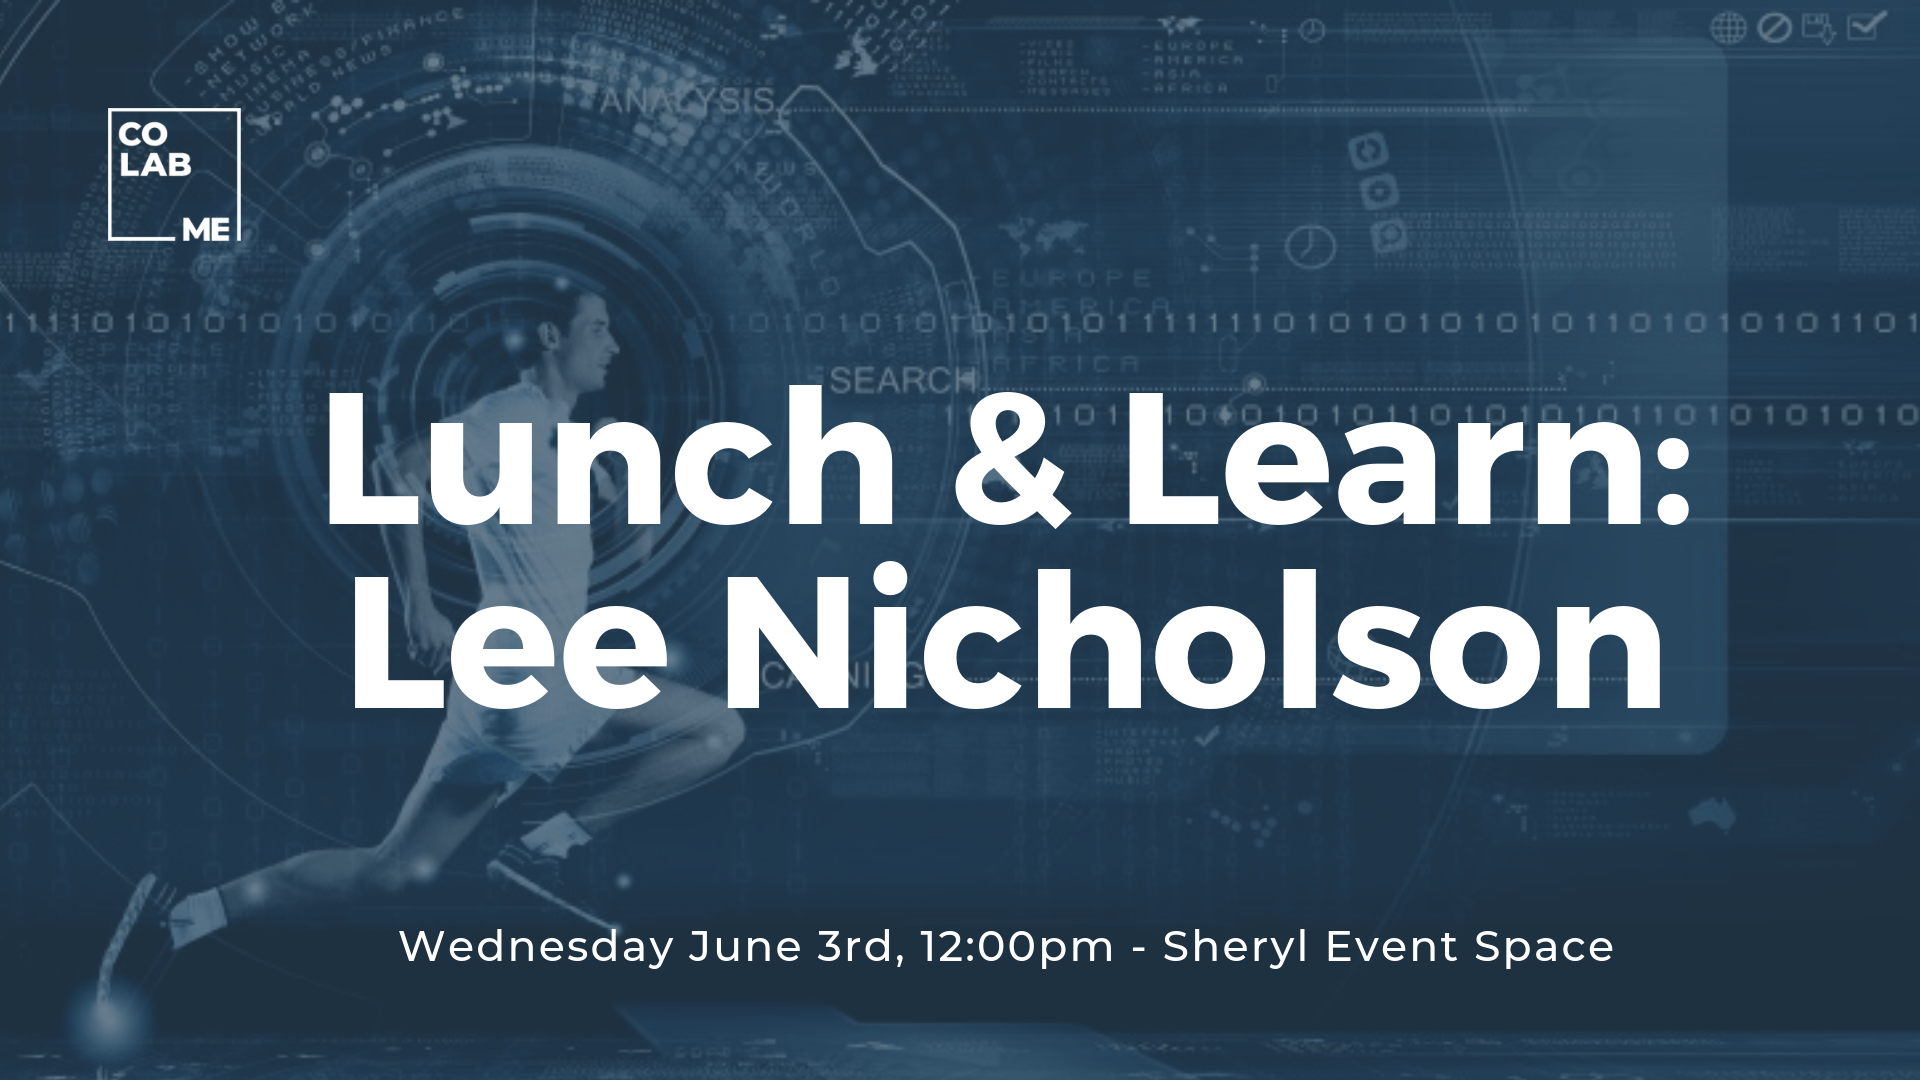 Lunch & Learn with Lee Nicholson